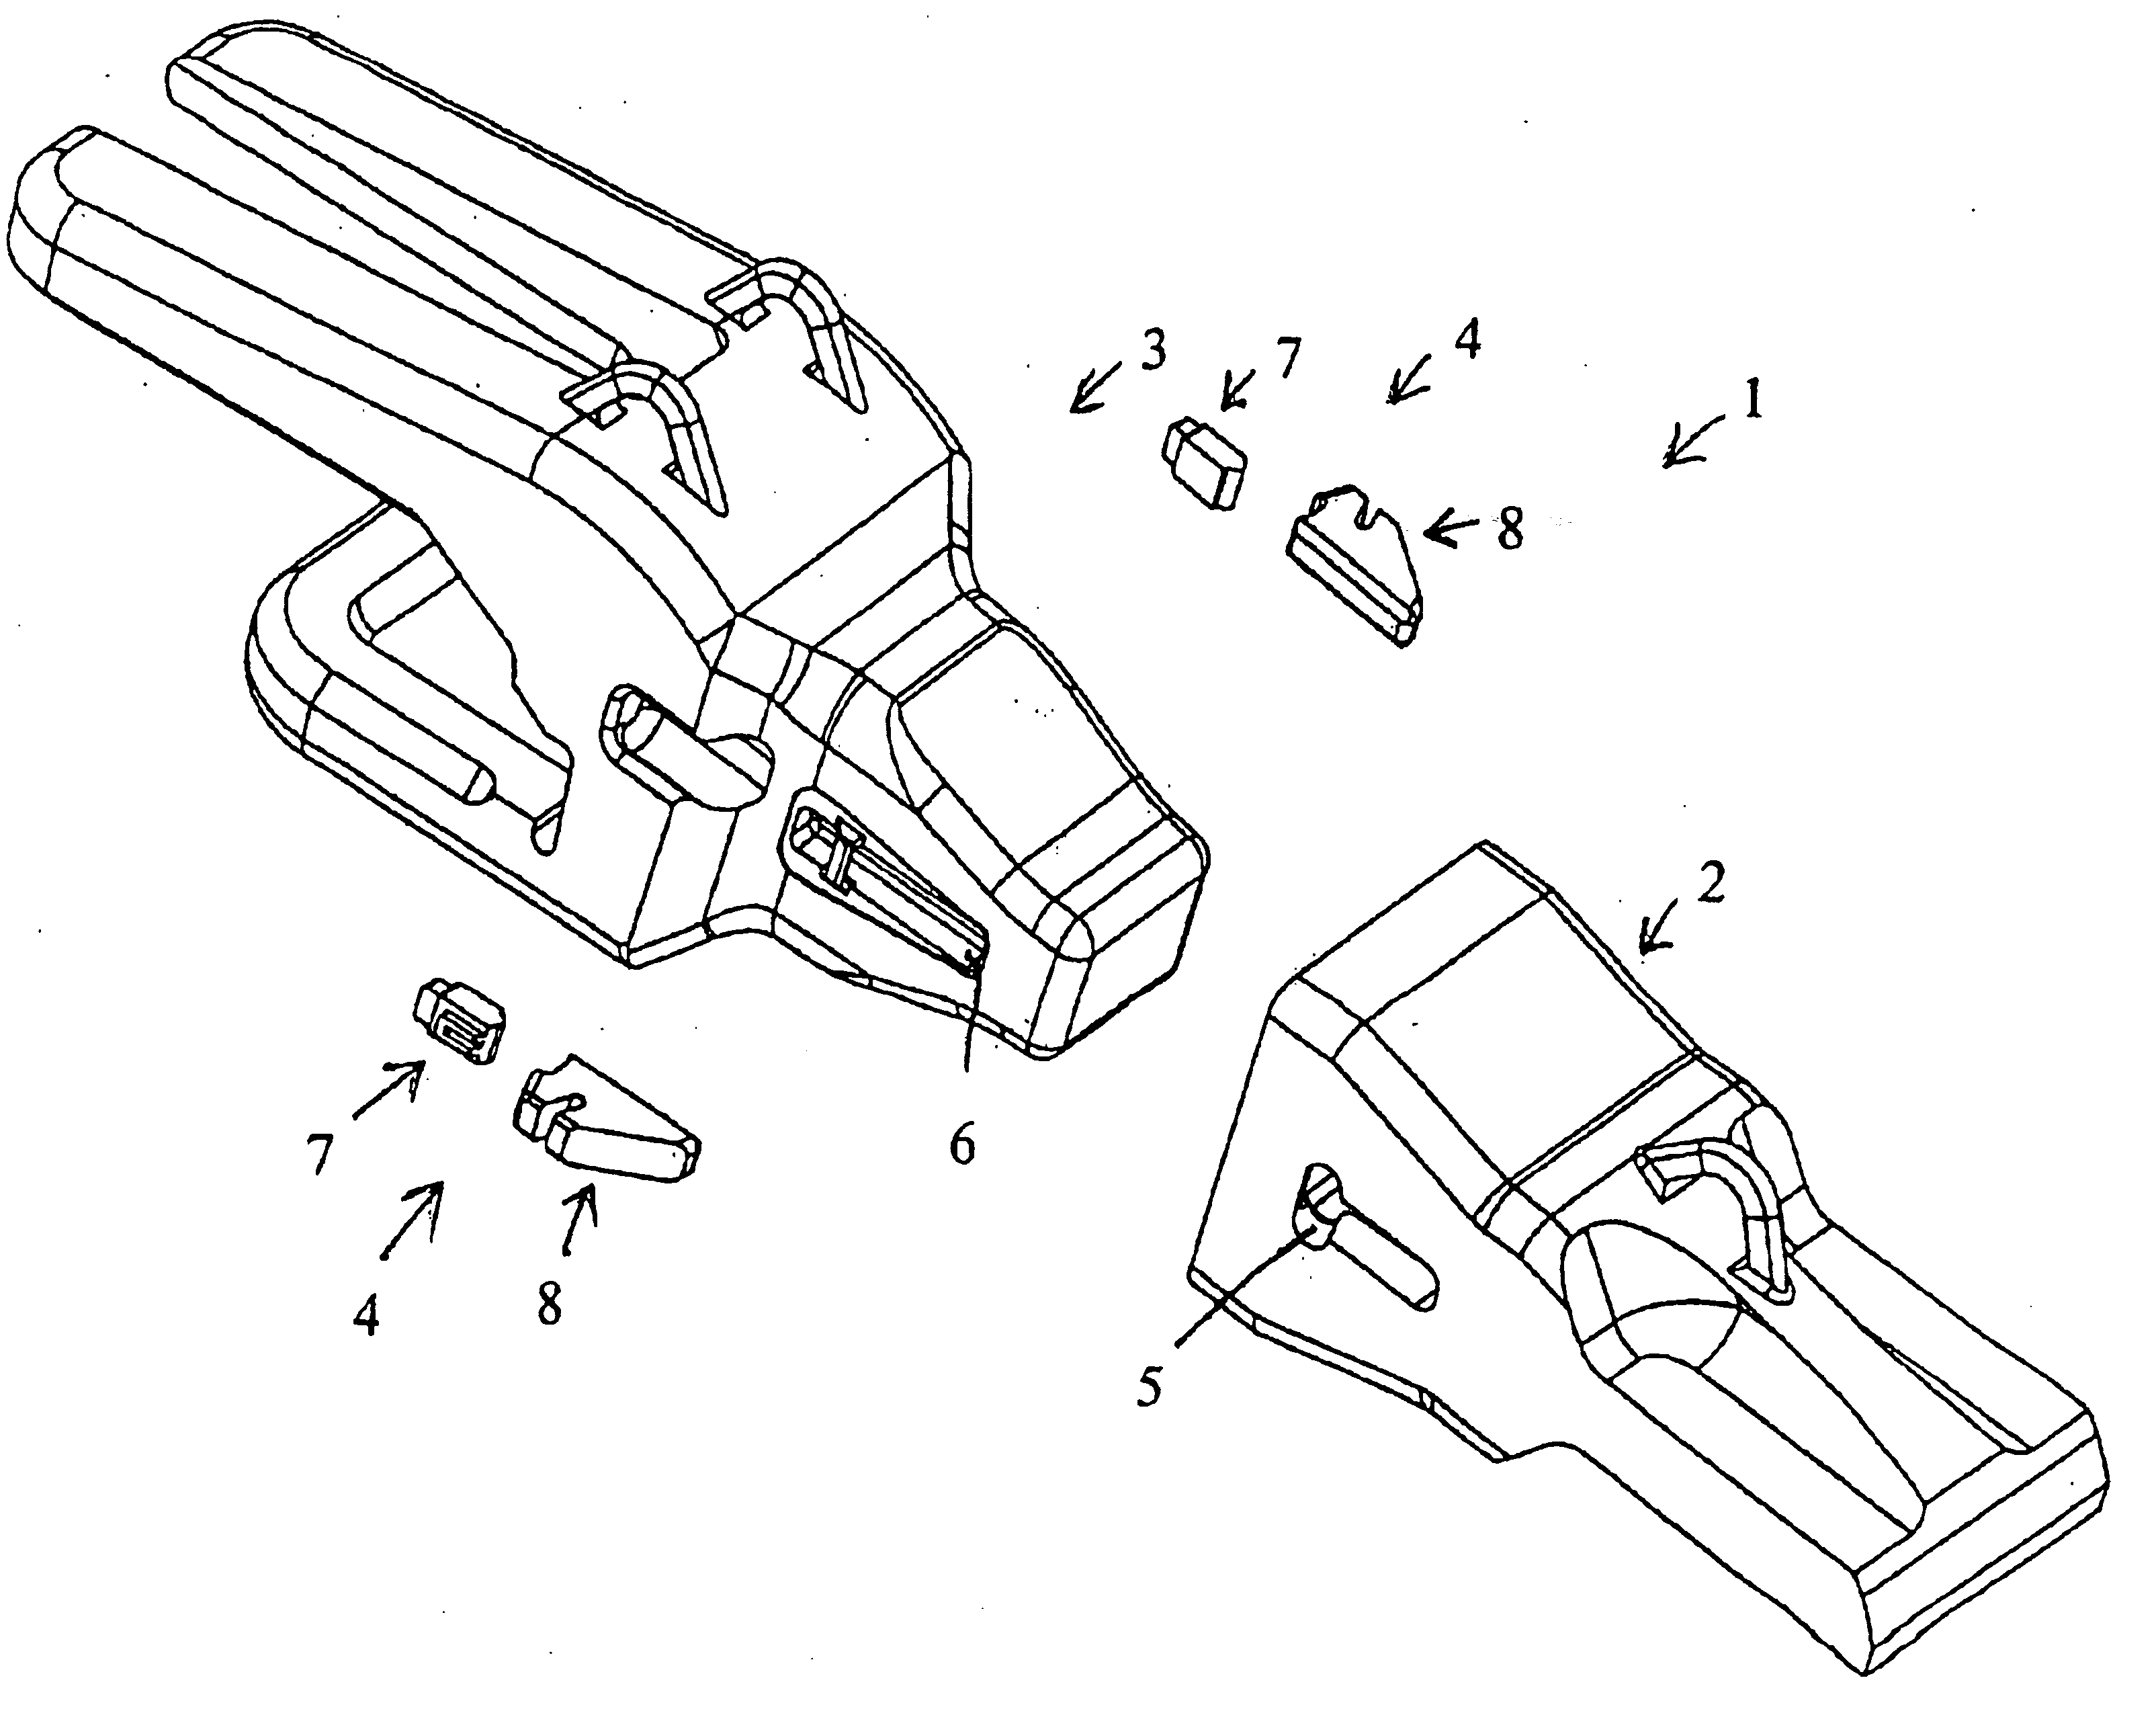 Locking assembly and method